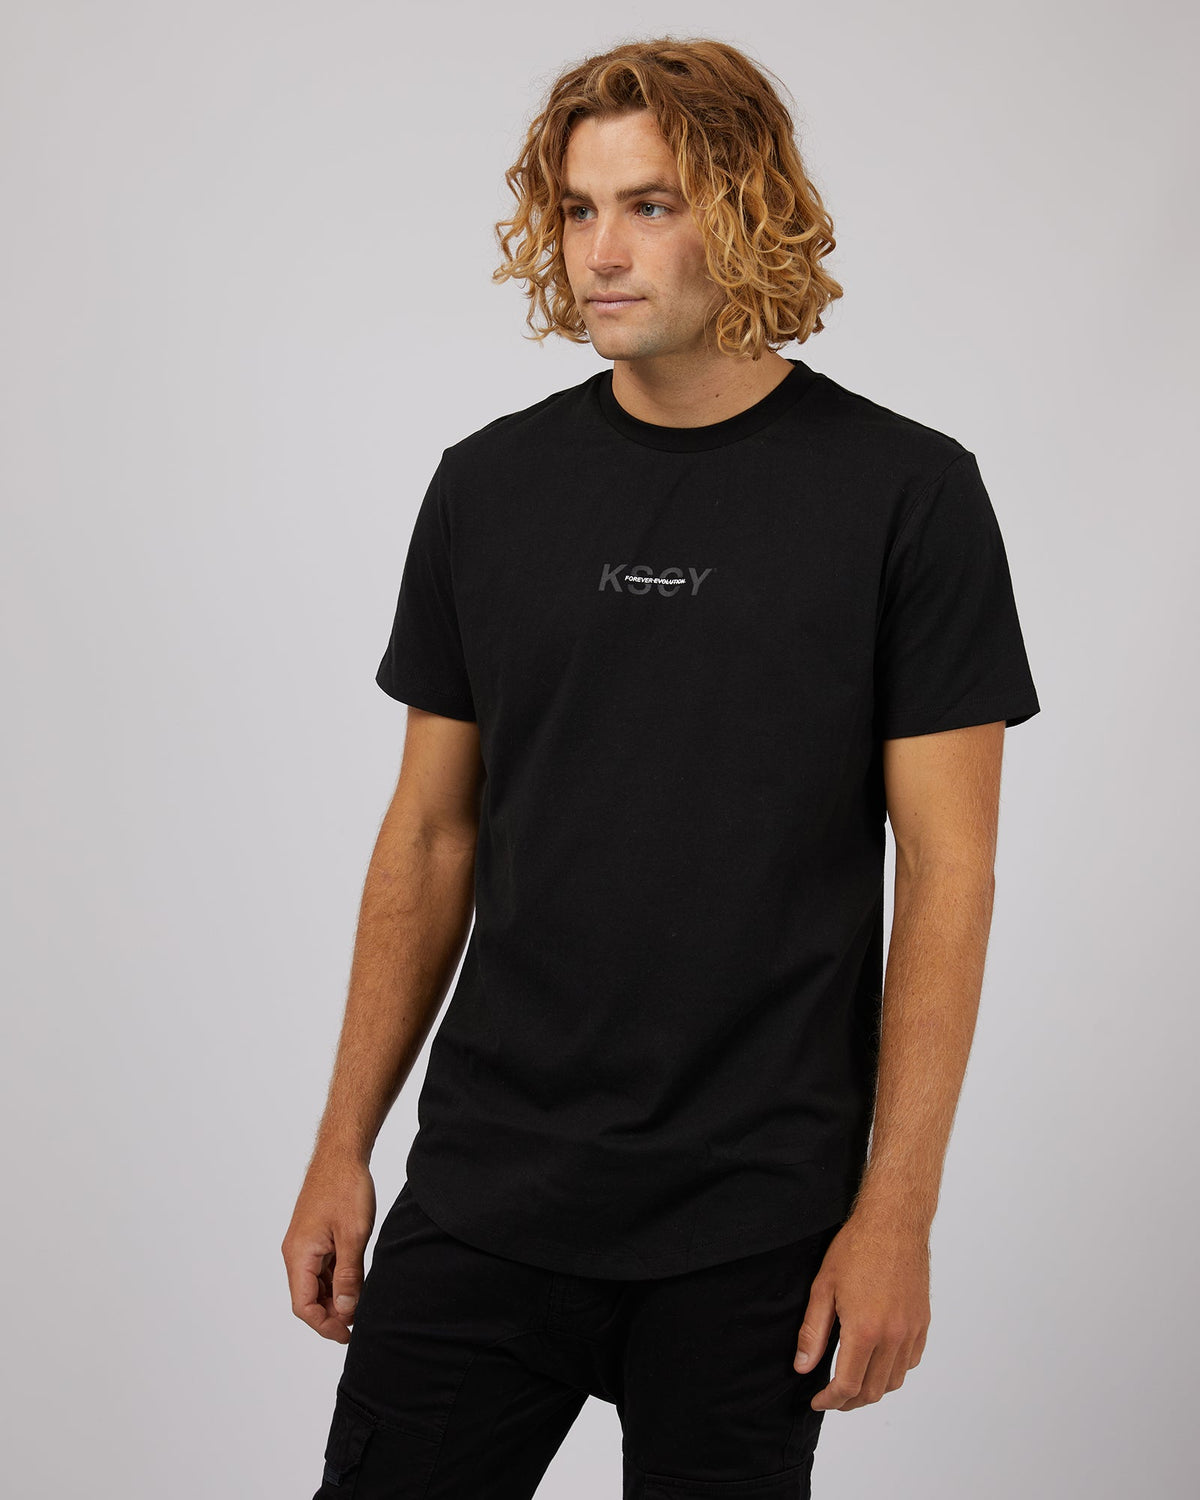 Kiss Chacey-Tustin Dual Curved Tee Jet Black-Edge Clothing